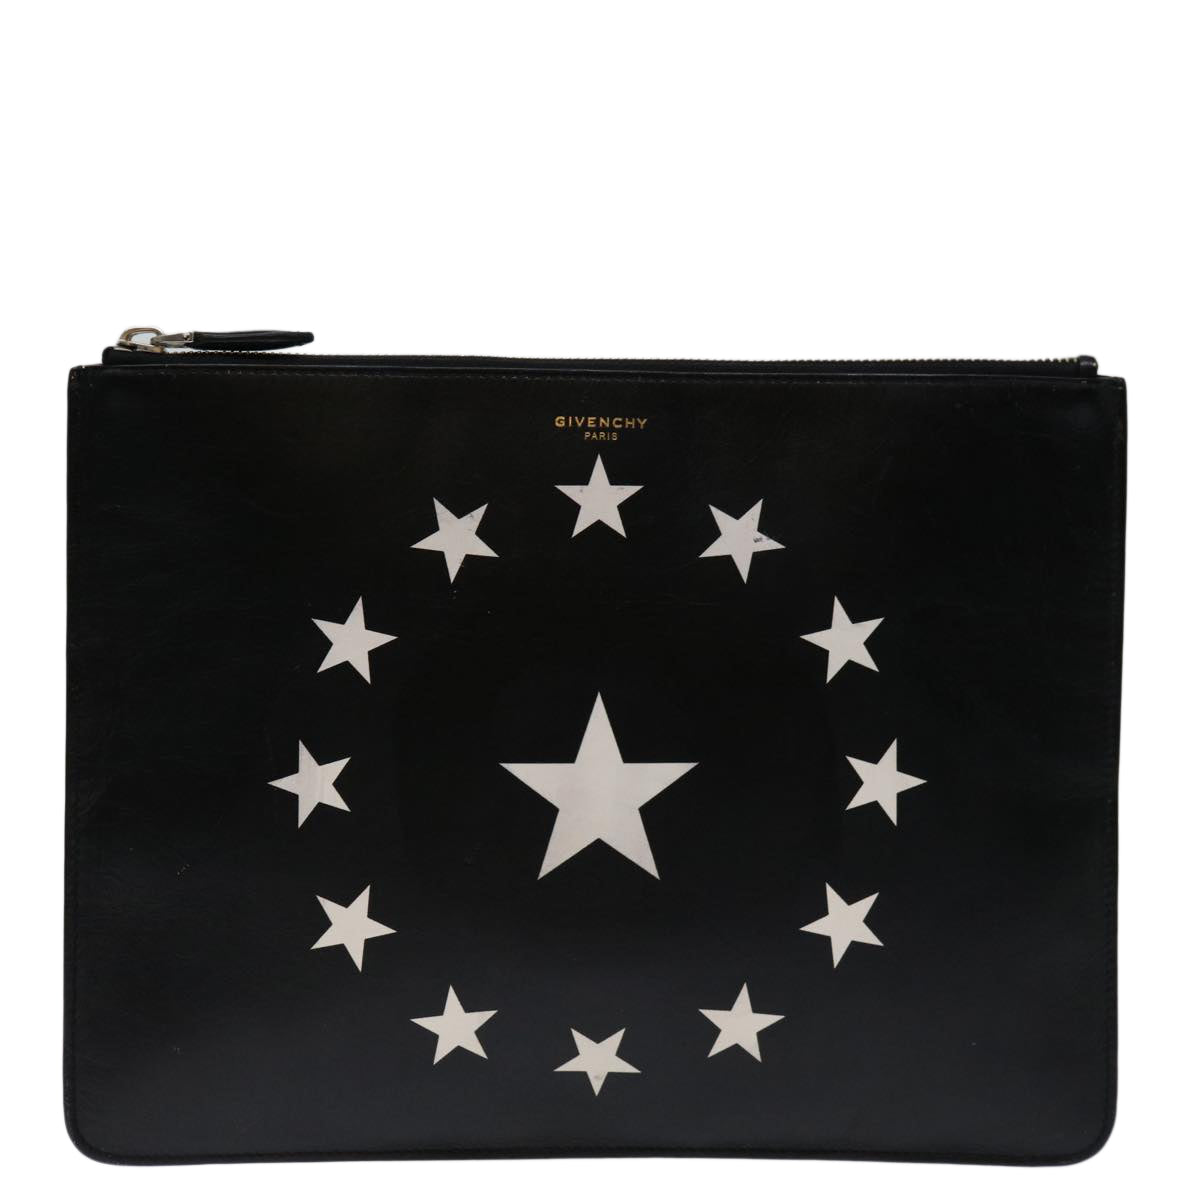 GIVENCHY Clutch Bag Leather Black Auth bs12859